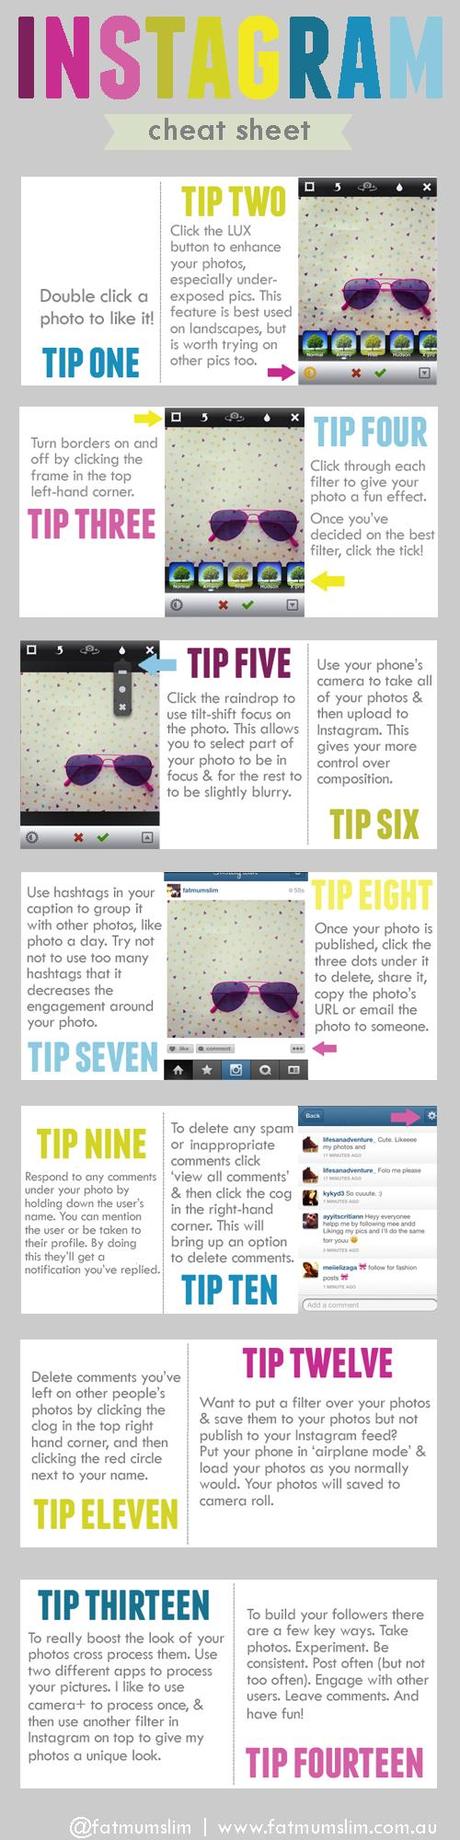 Instagram Tips and Tricks – Editing & Sharing